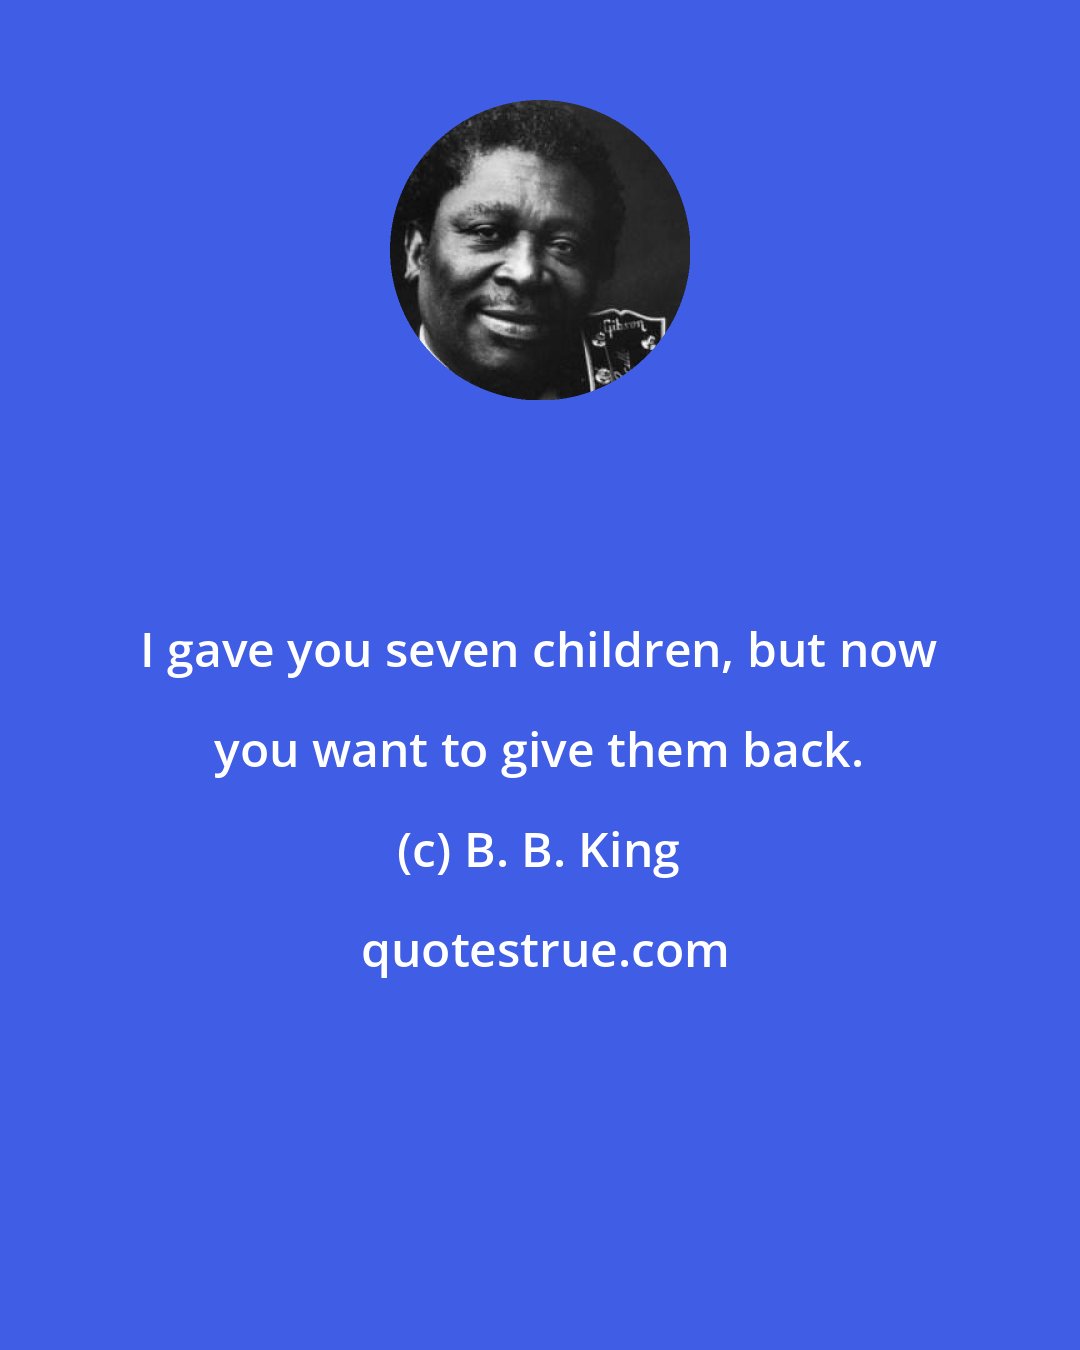 B. B. King: I gave you seven children, but now you want to give them back.